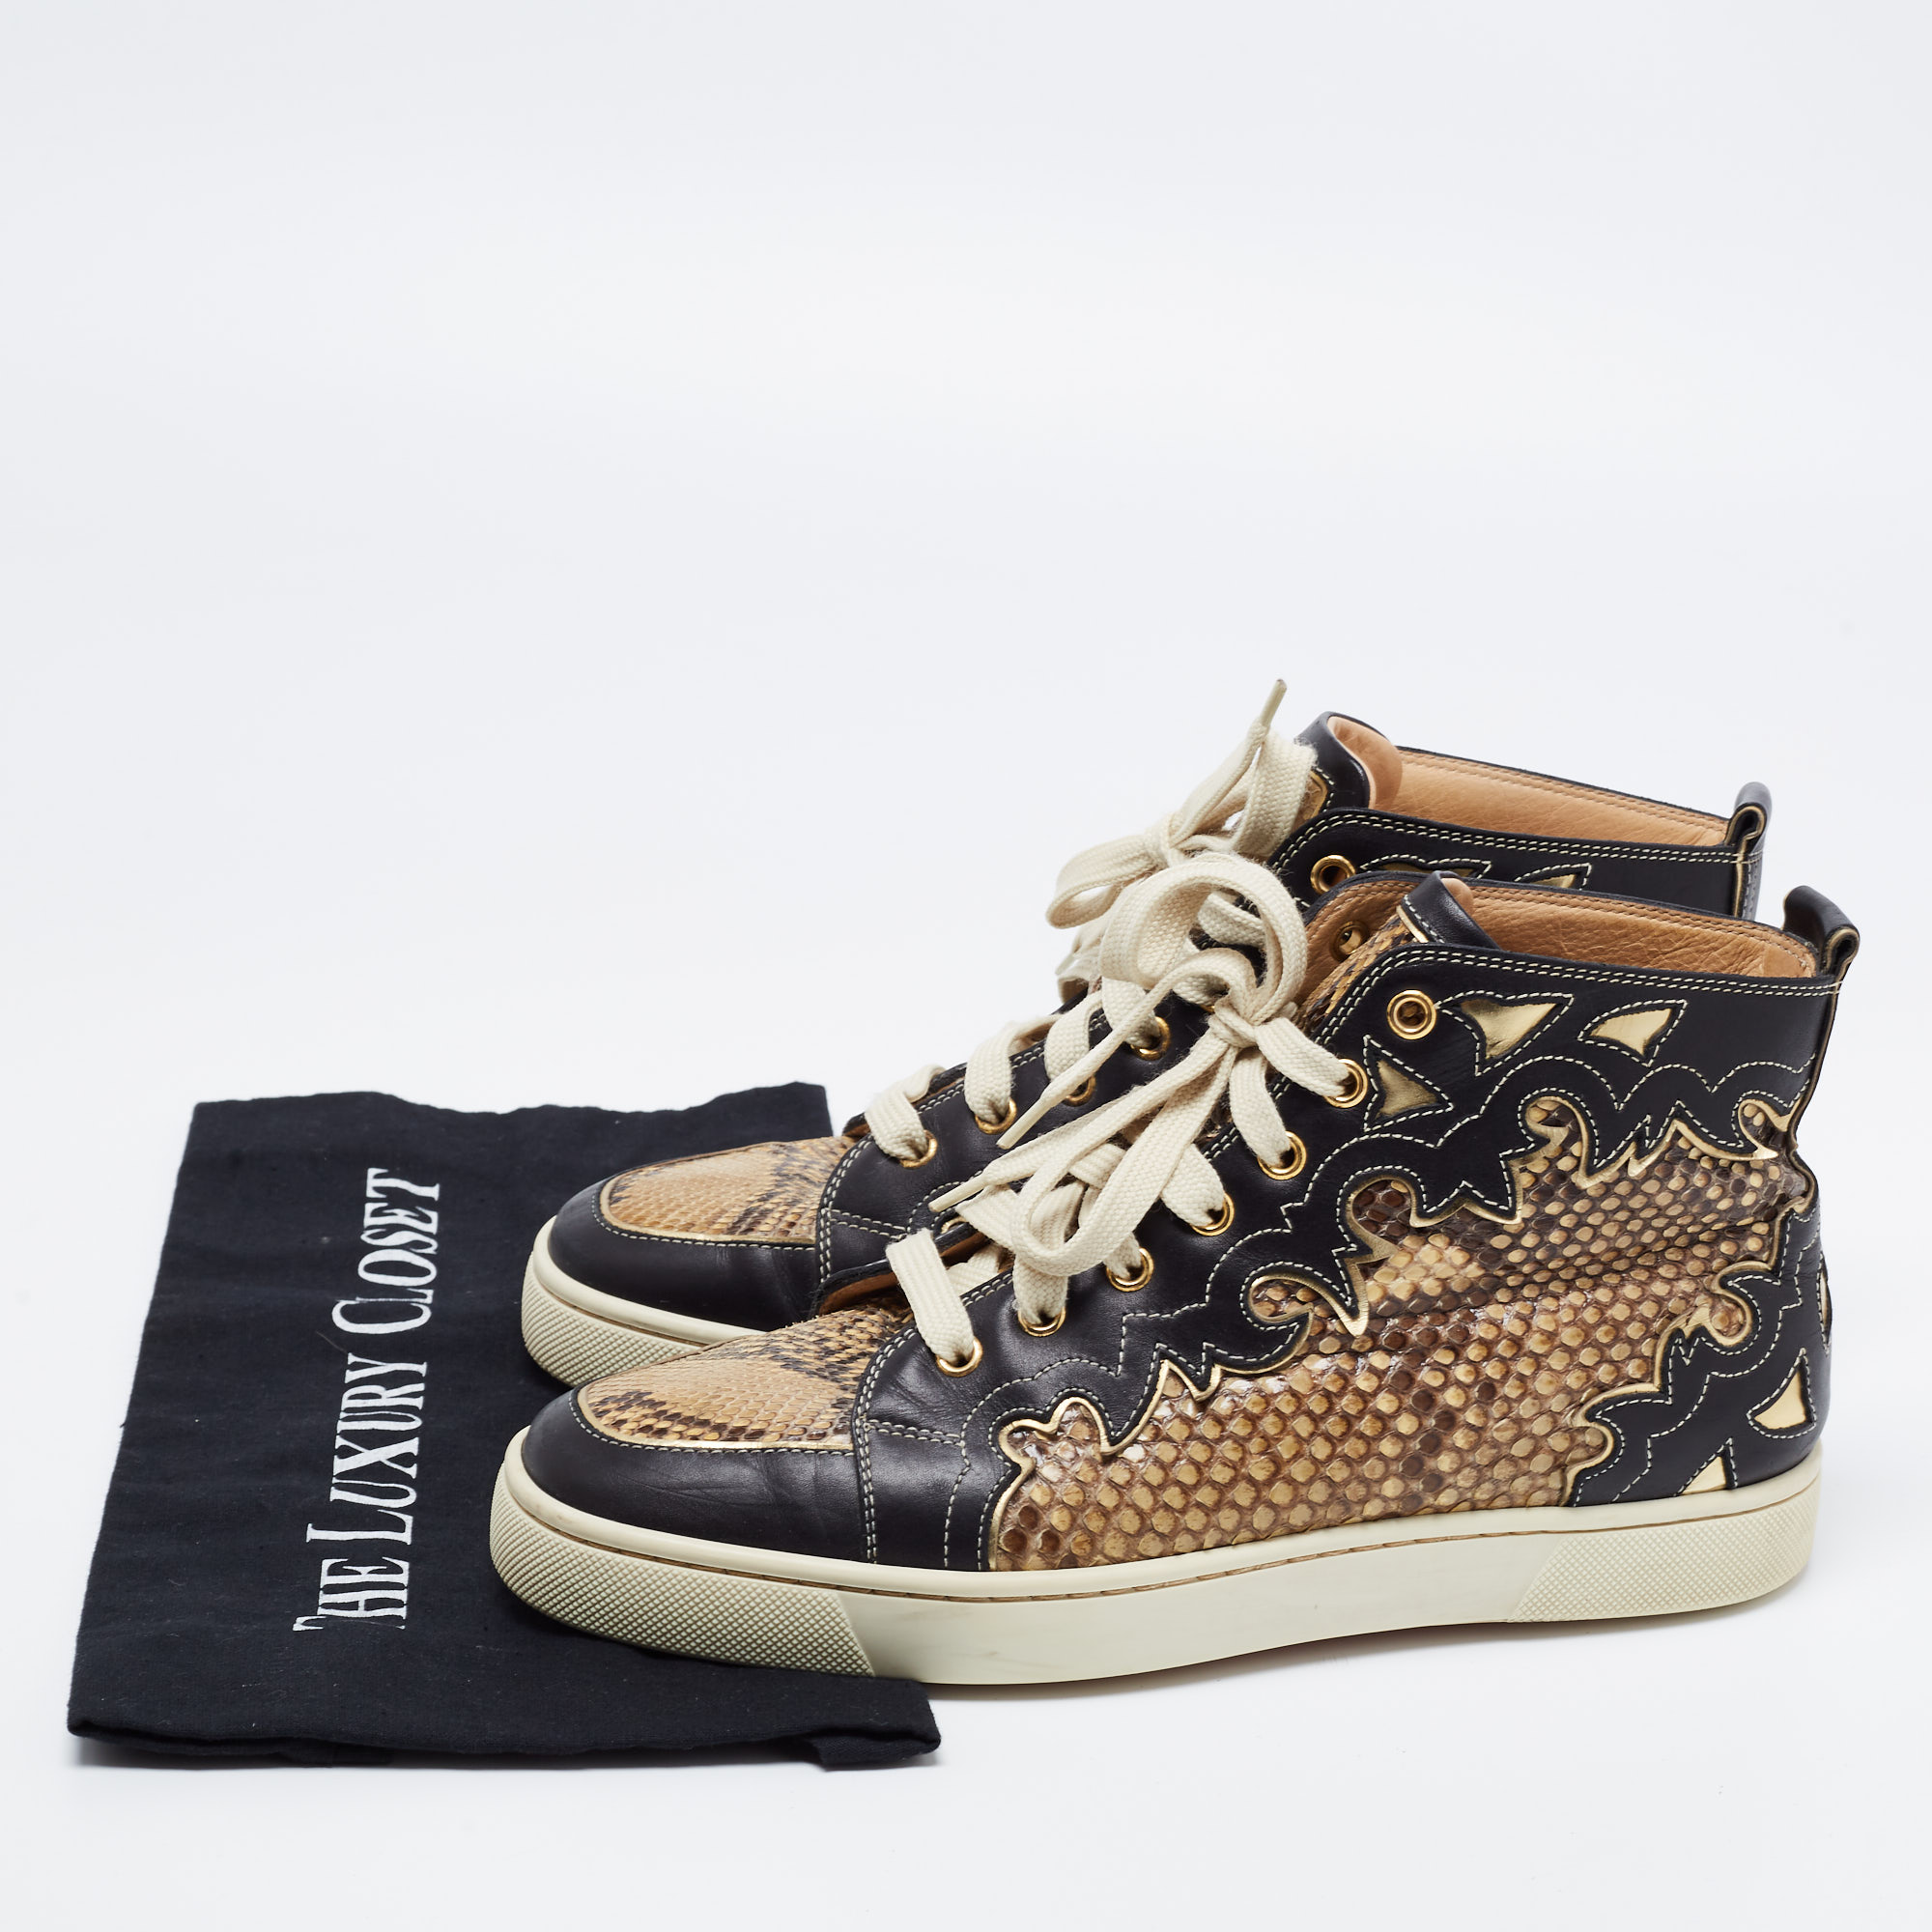 Christian Louboutin Tricolor Leather And Python Rantus Orlato High Top Sneakers Size 39.5